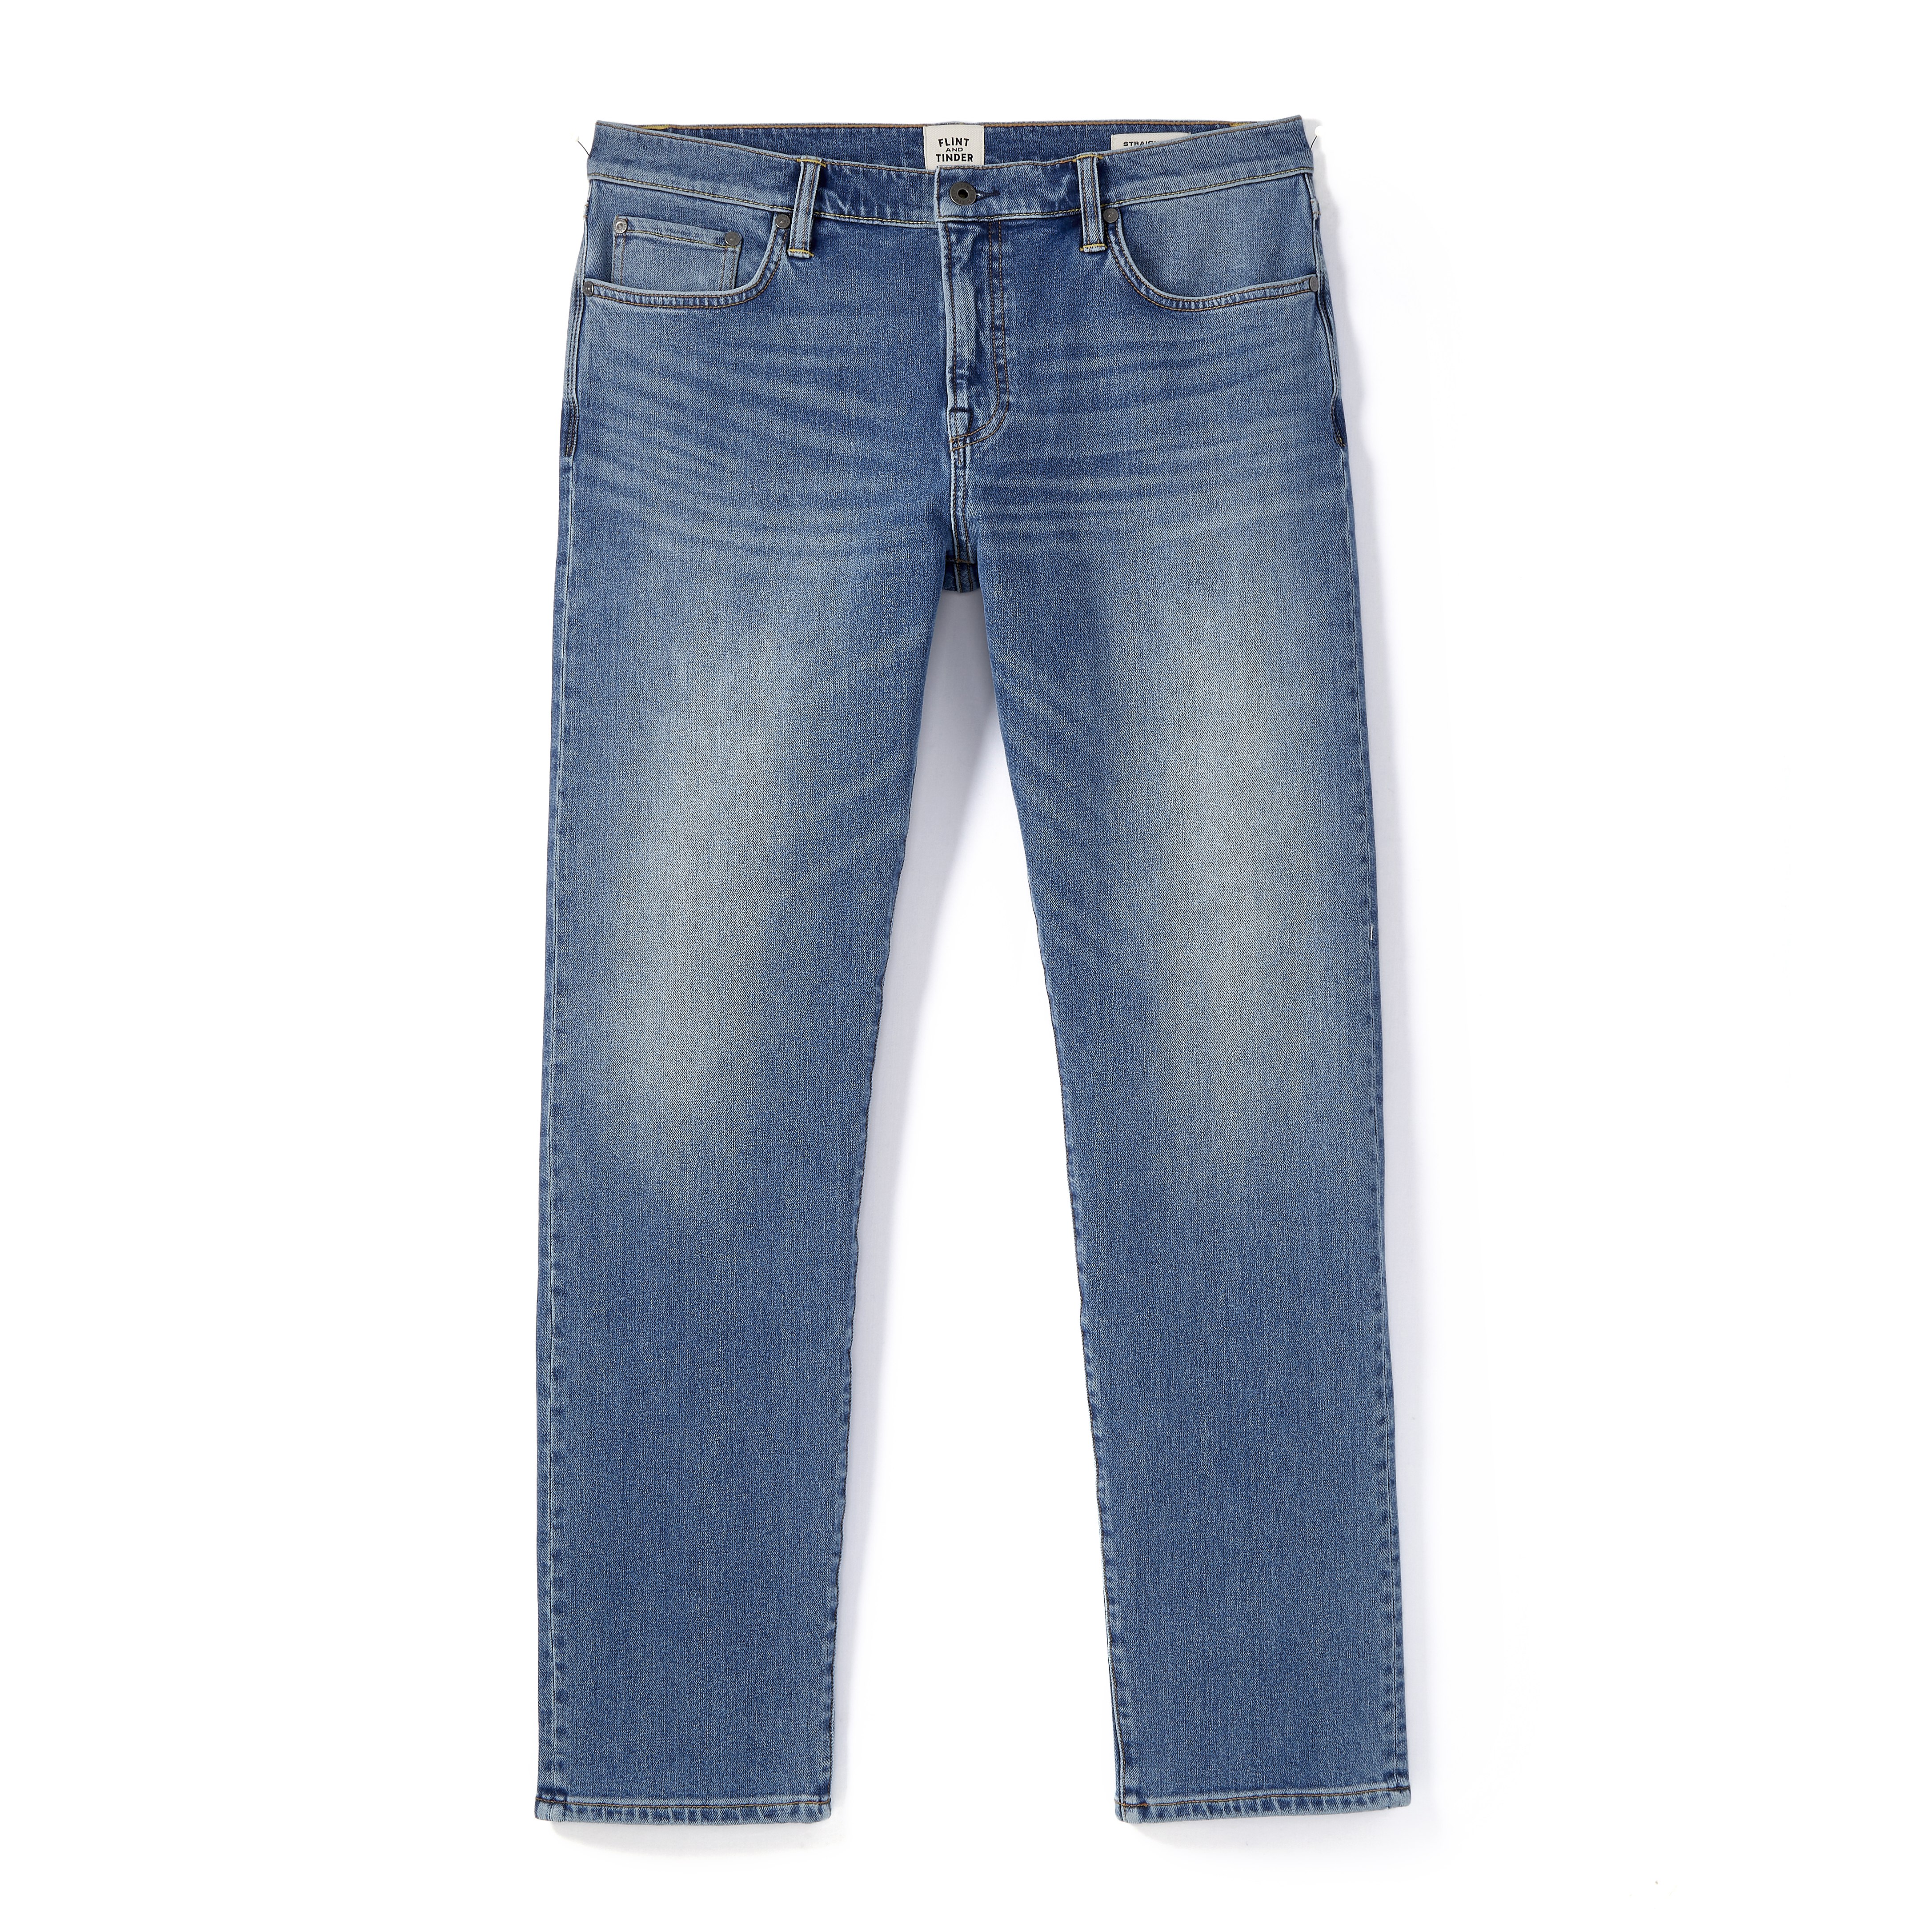 Buy Light Blue Power Stretch Slim Fit Jeans Online In India